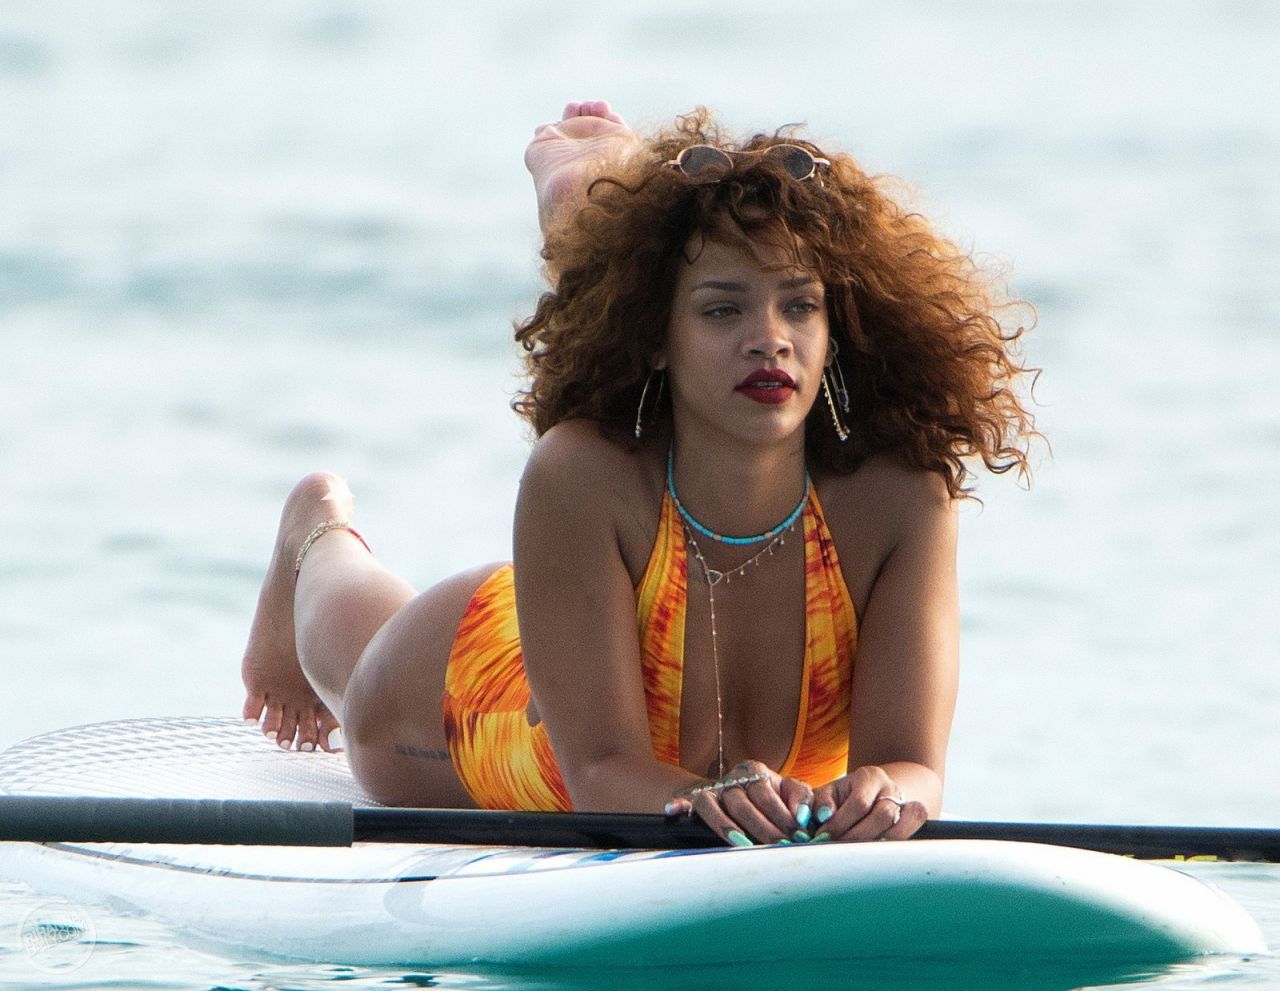 Rihanna Paddle Boating in a Swimsuit in Barbados, August 201